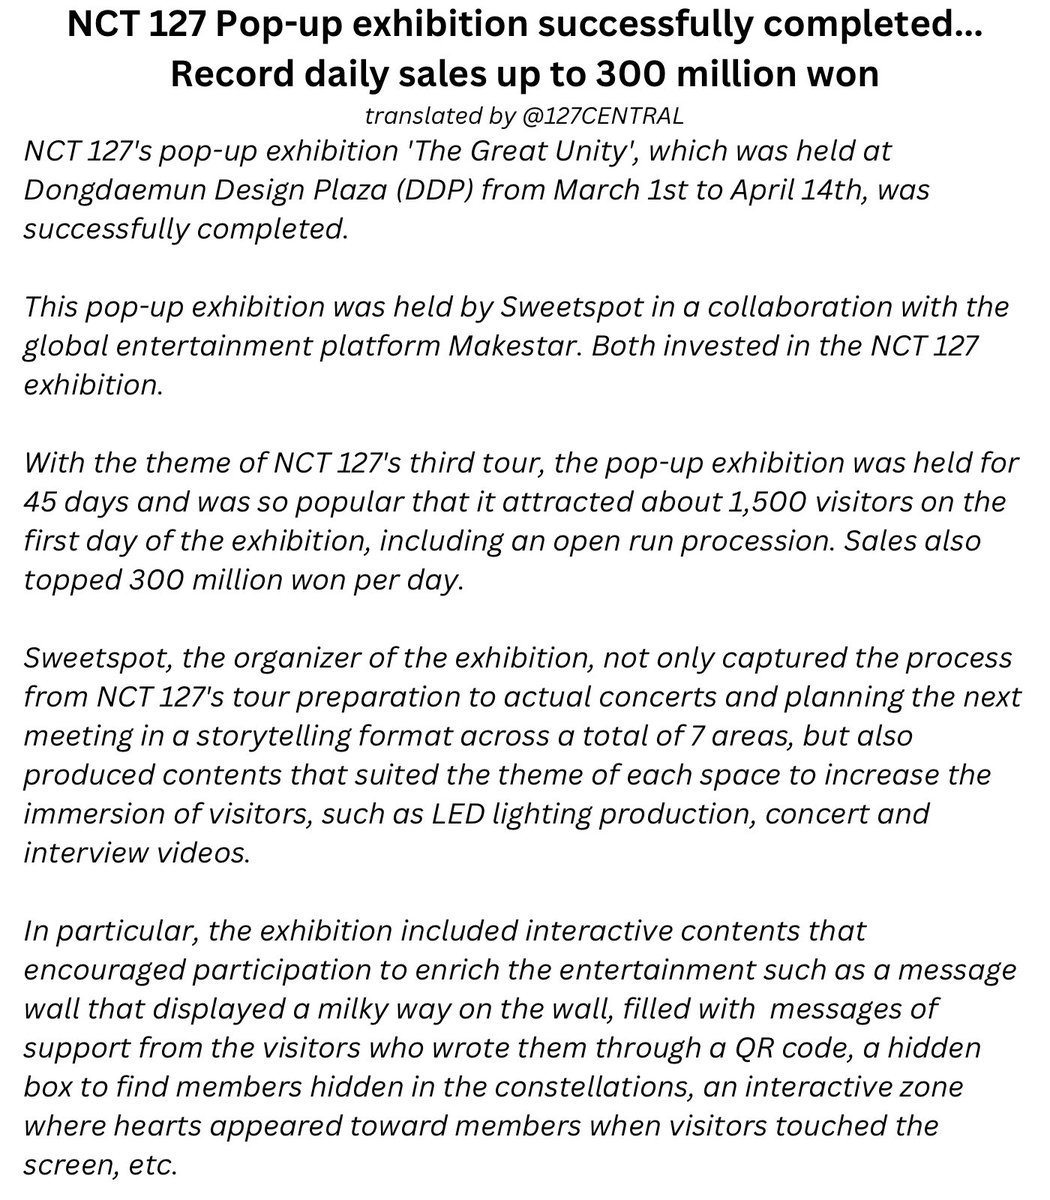 240419 [PRESS] #NCT127 Pop-up exhibition successfully completed... Record daily sales up to 300 million won “The pop-up exhibition was held for 45 days & was so popular that it attracted about 1,500 visitors on the first day of the exhibition.” @NCTsmtown_127